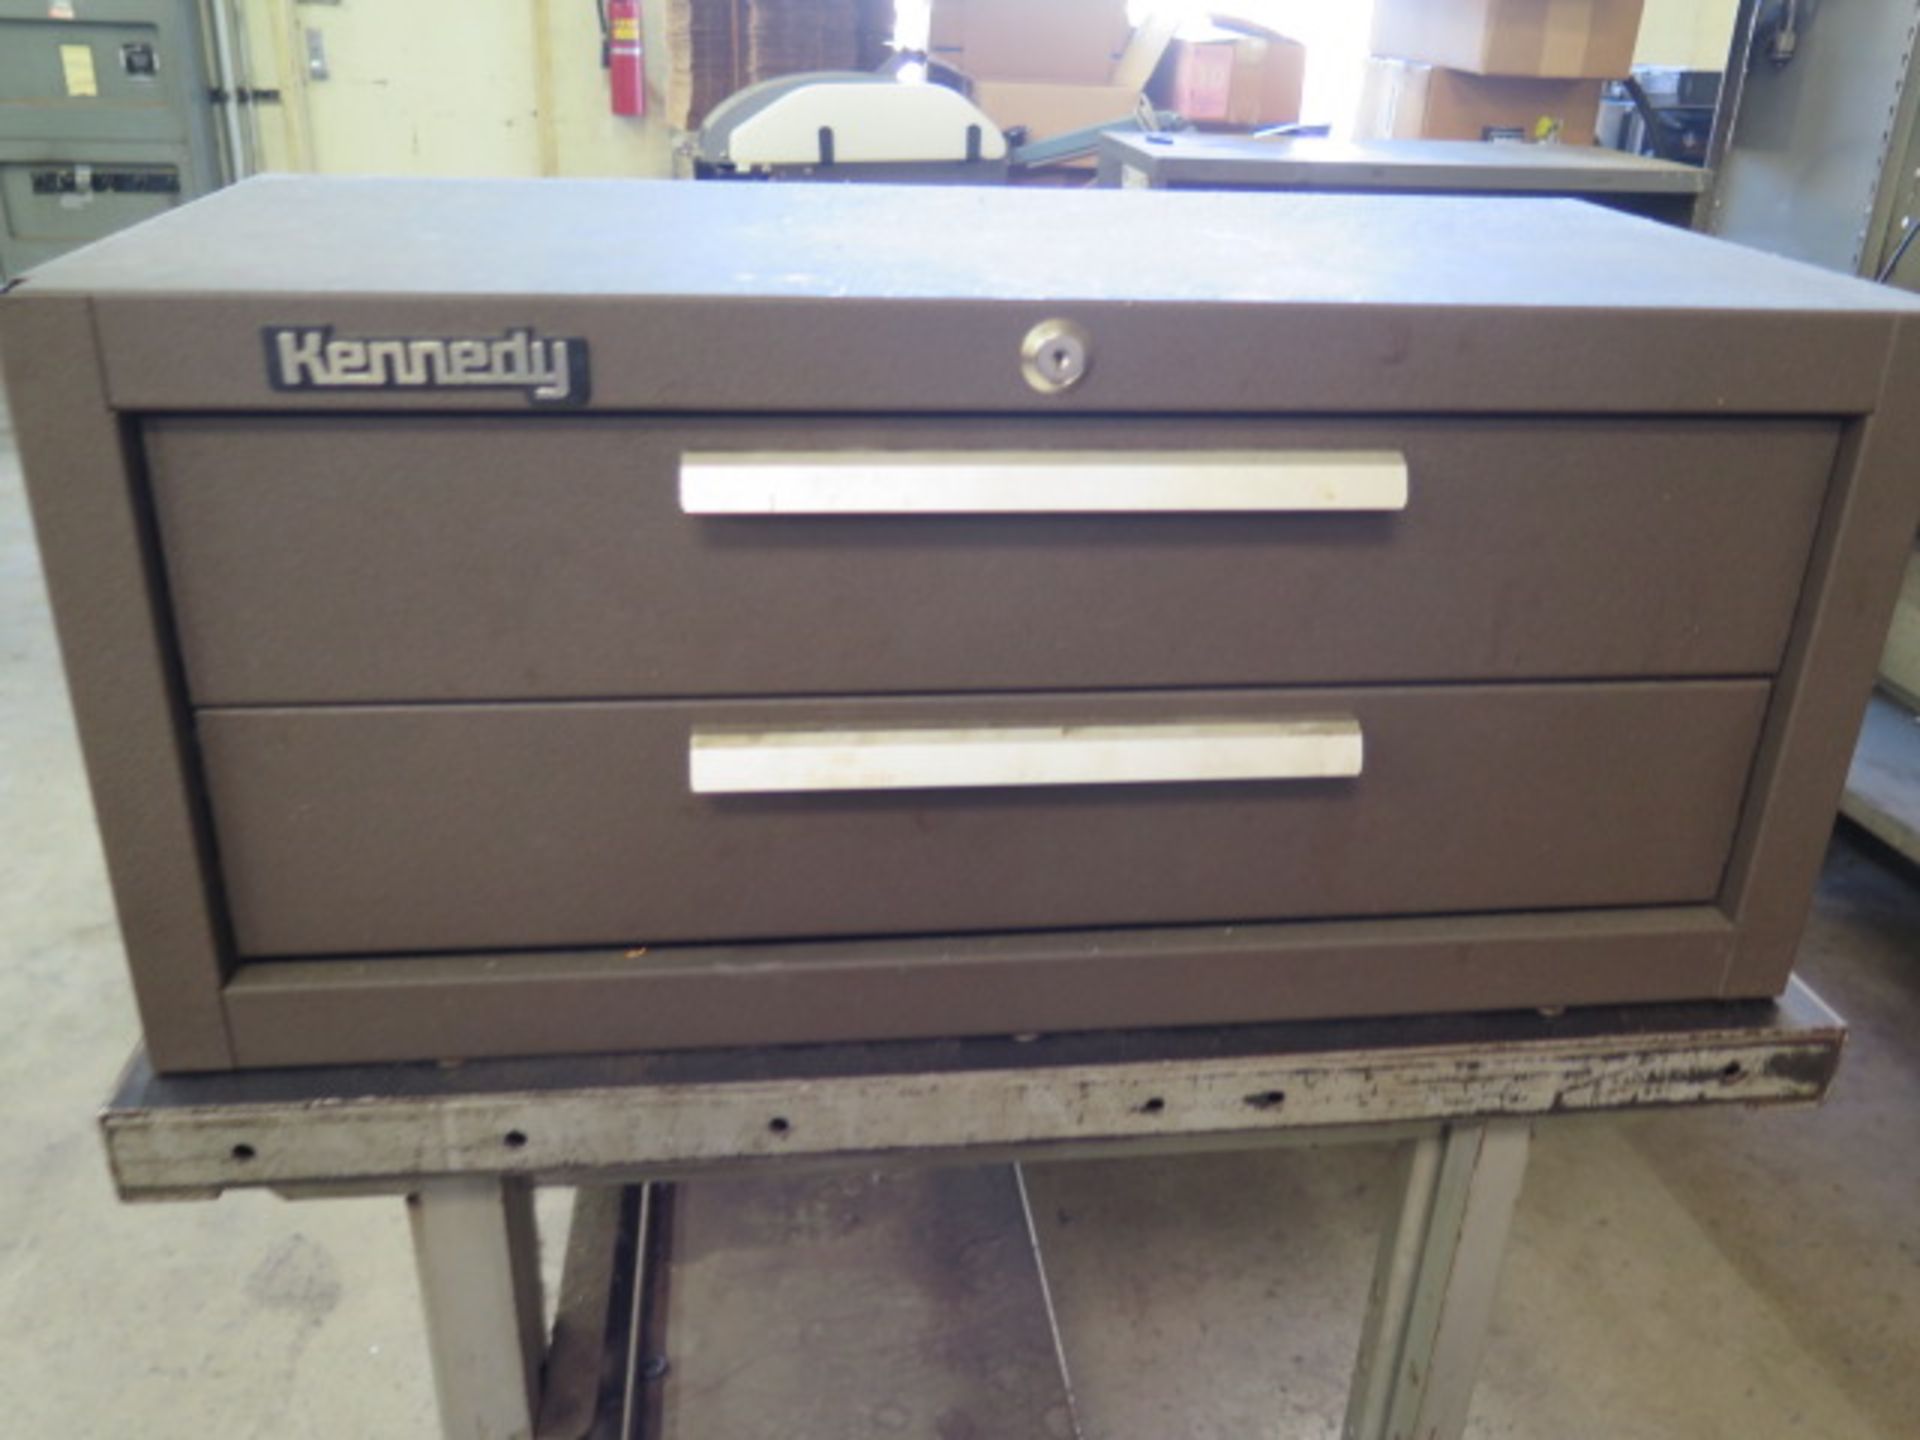 Kennedy 2-Drawer Tool Box (SOLD AS-IS - NO WARRANTY) - Image 2 of 5